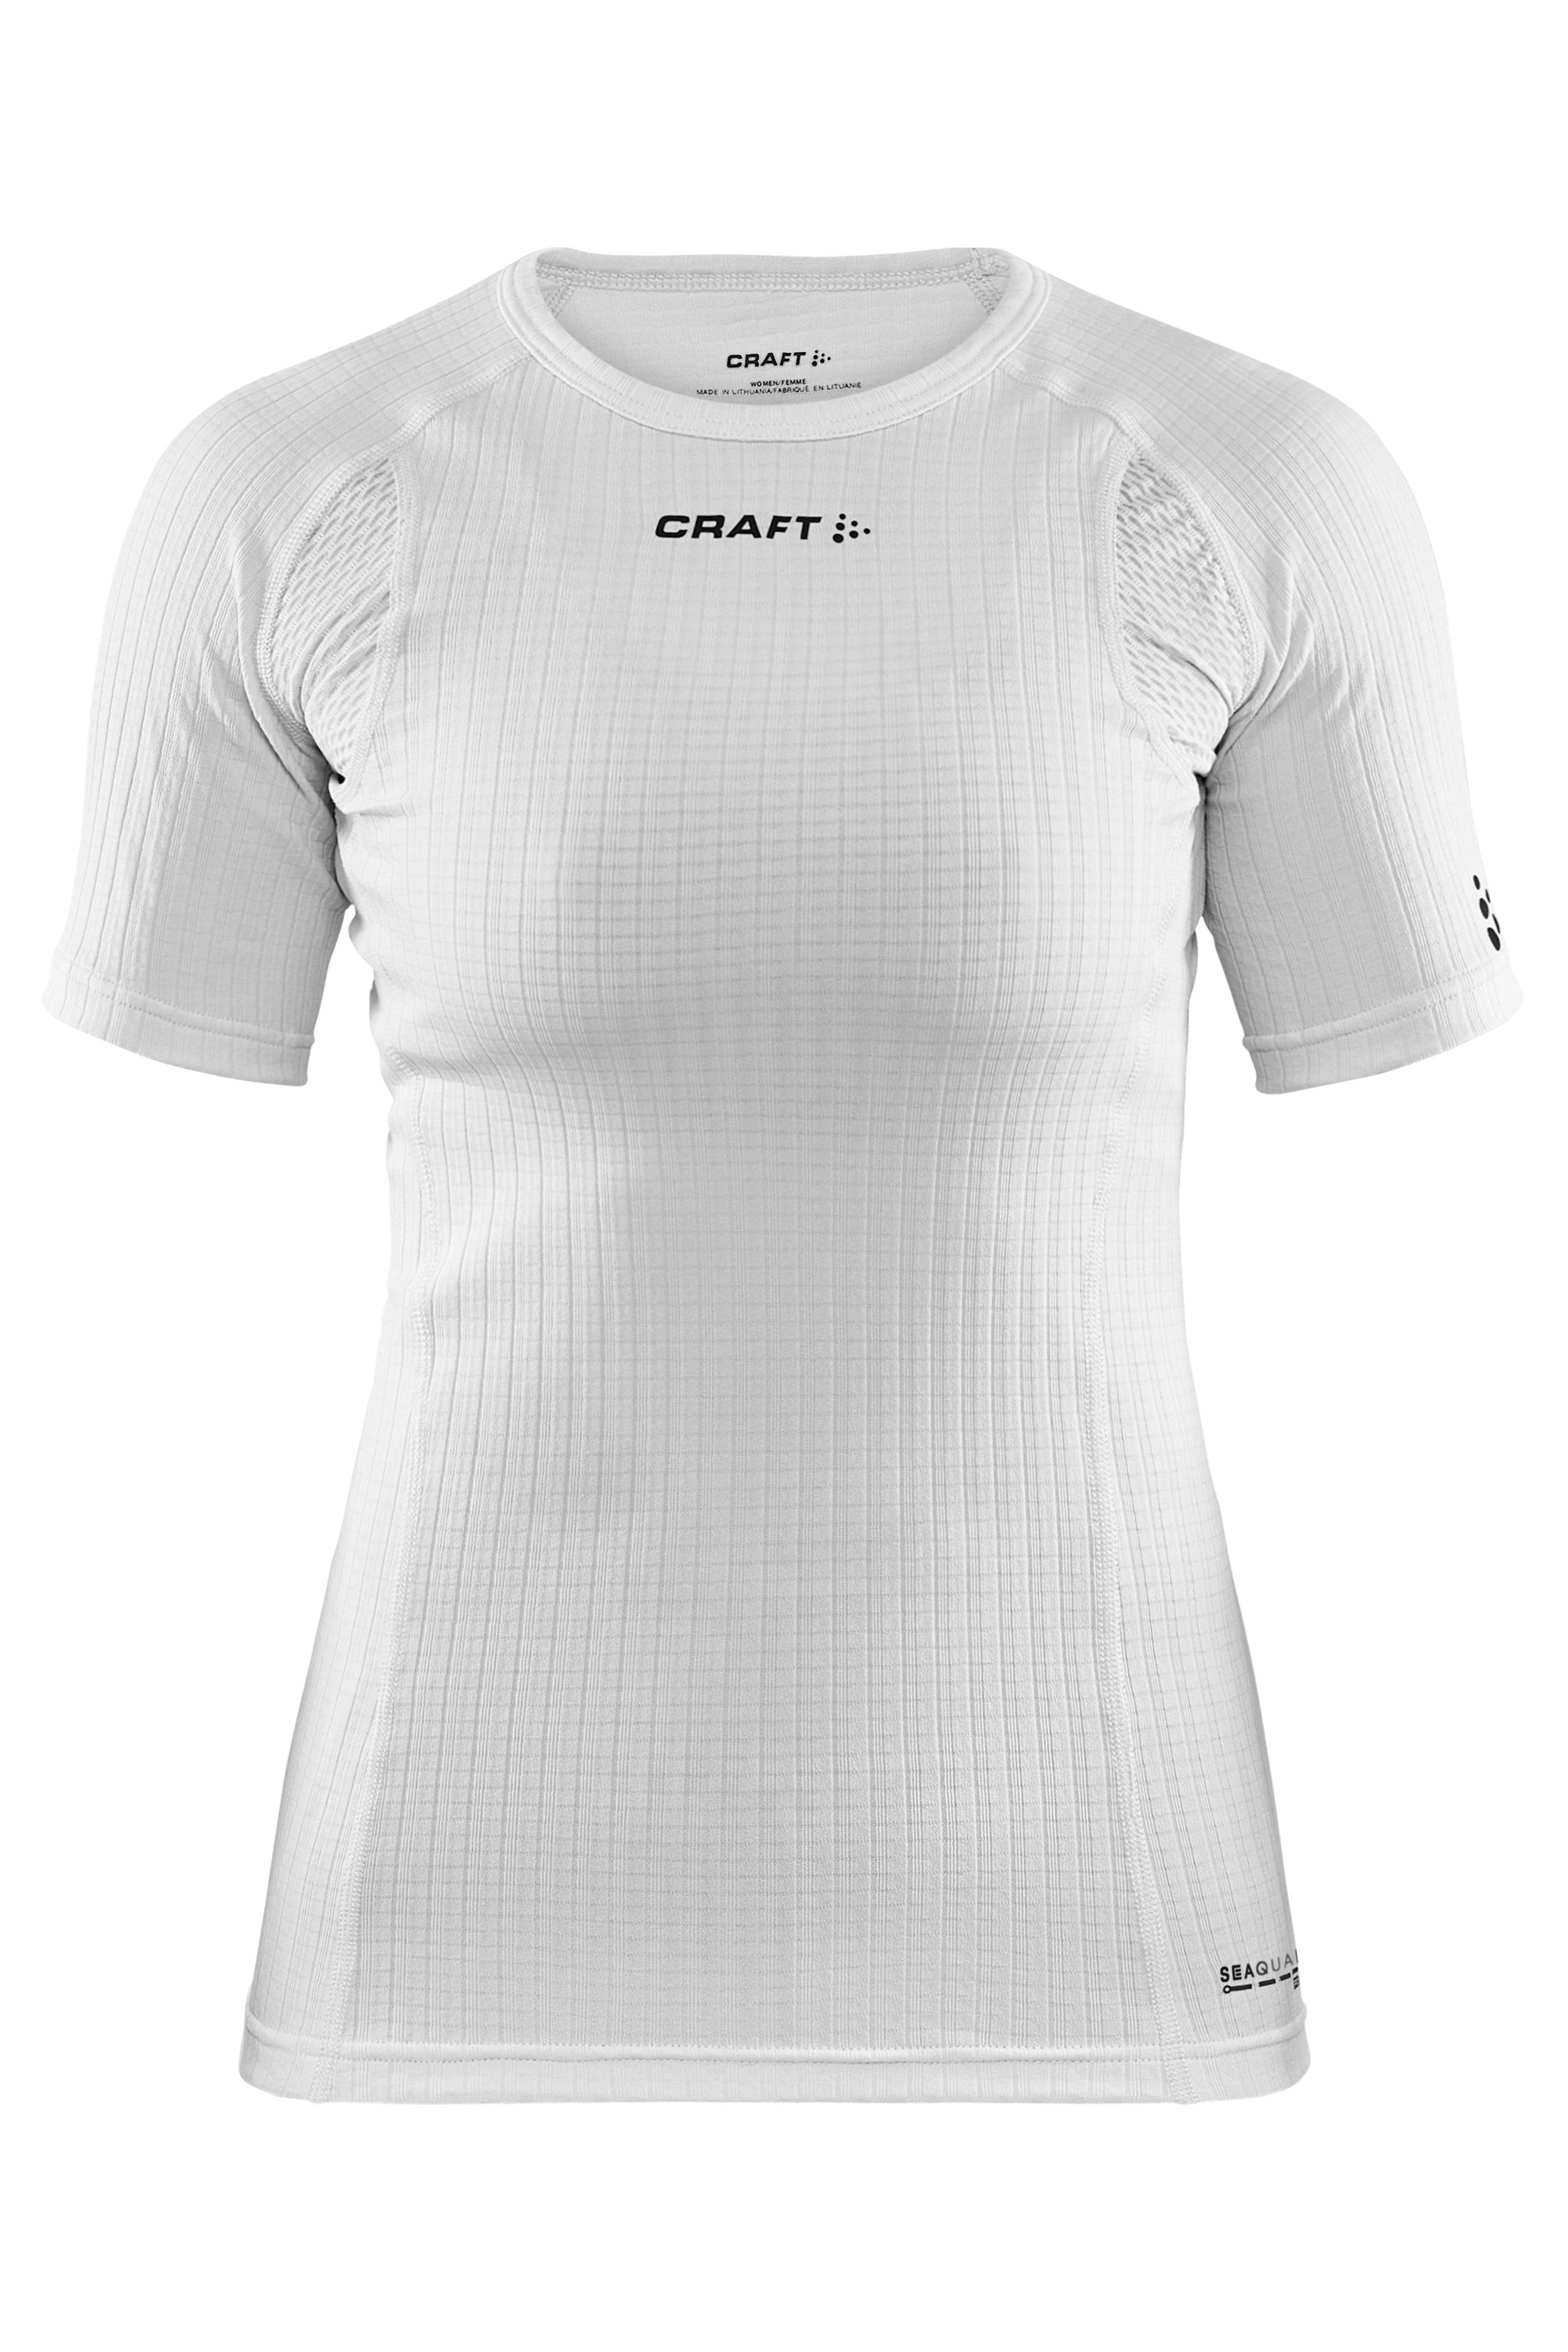 Active Extreme X Womens Baselayer T-Shirt -